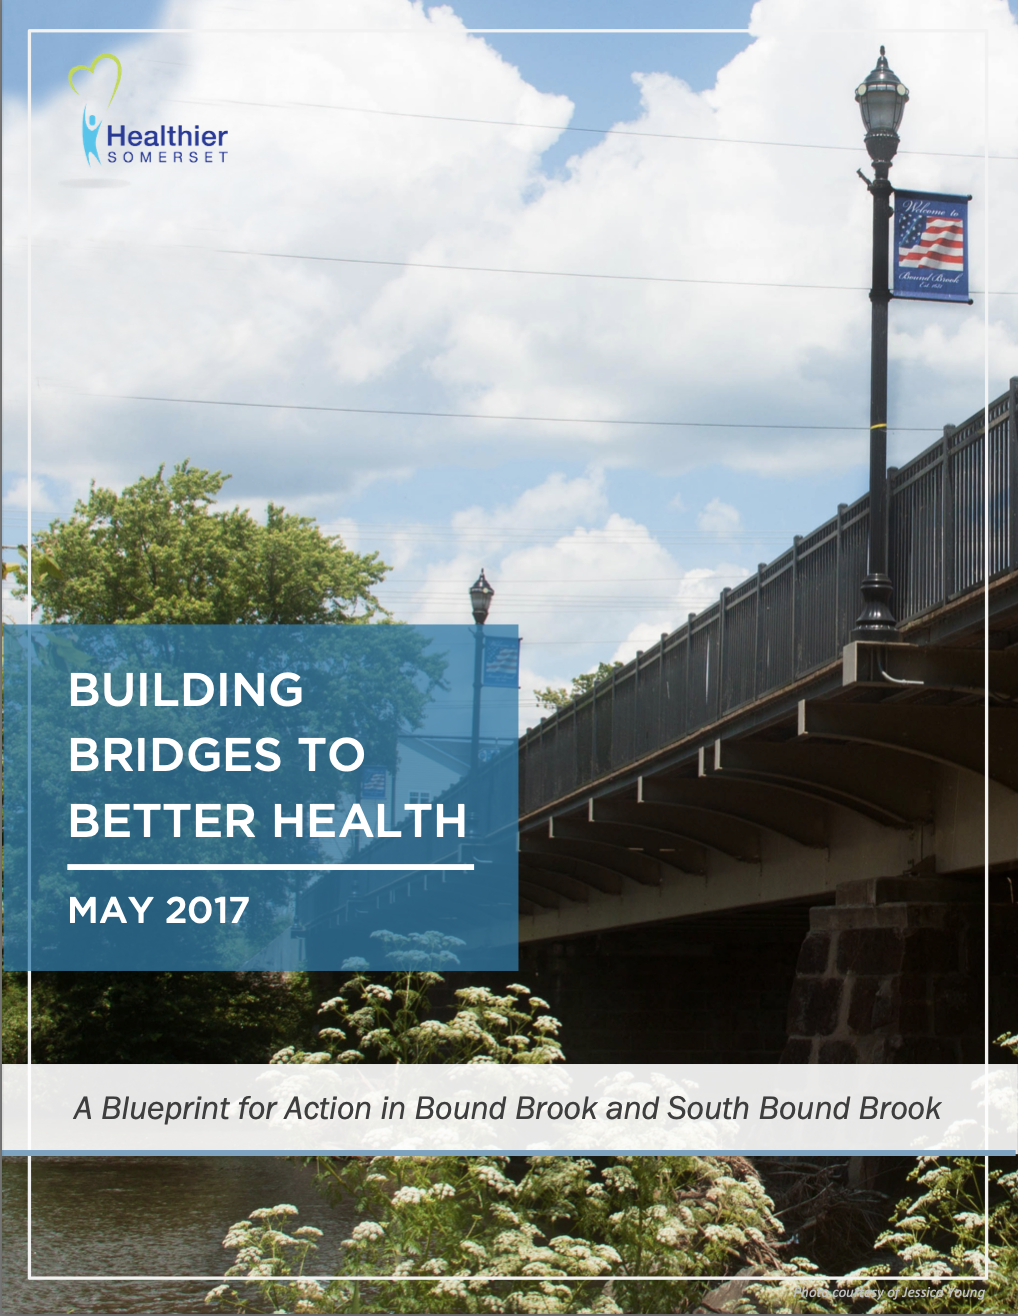 A Blueprint for Action in Bound Brook and South Bound Brook